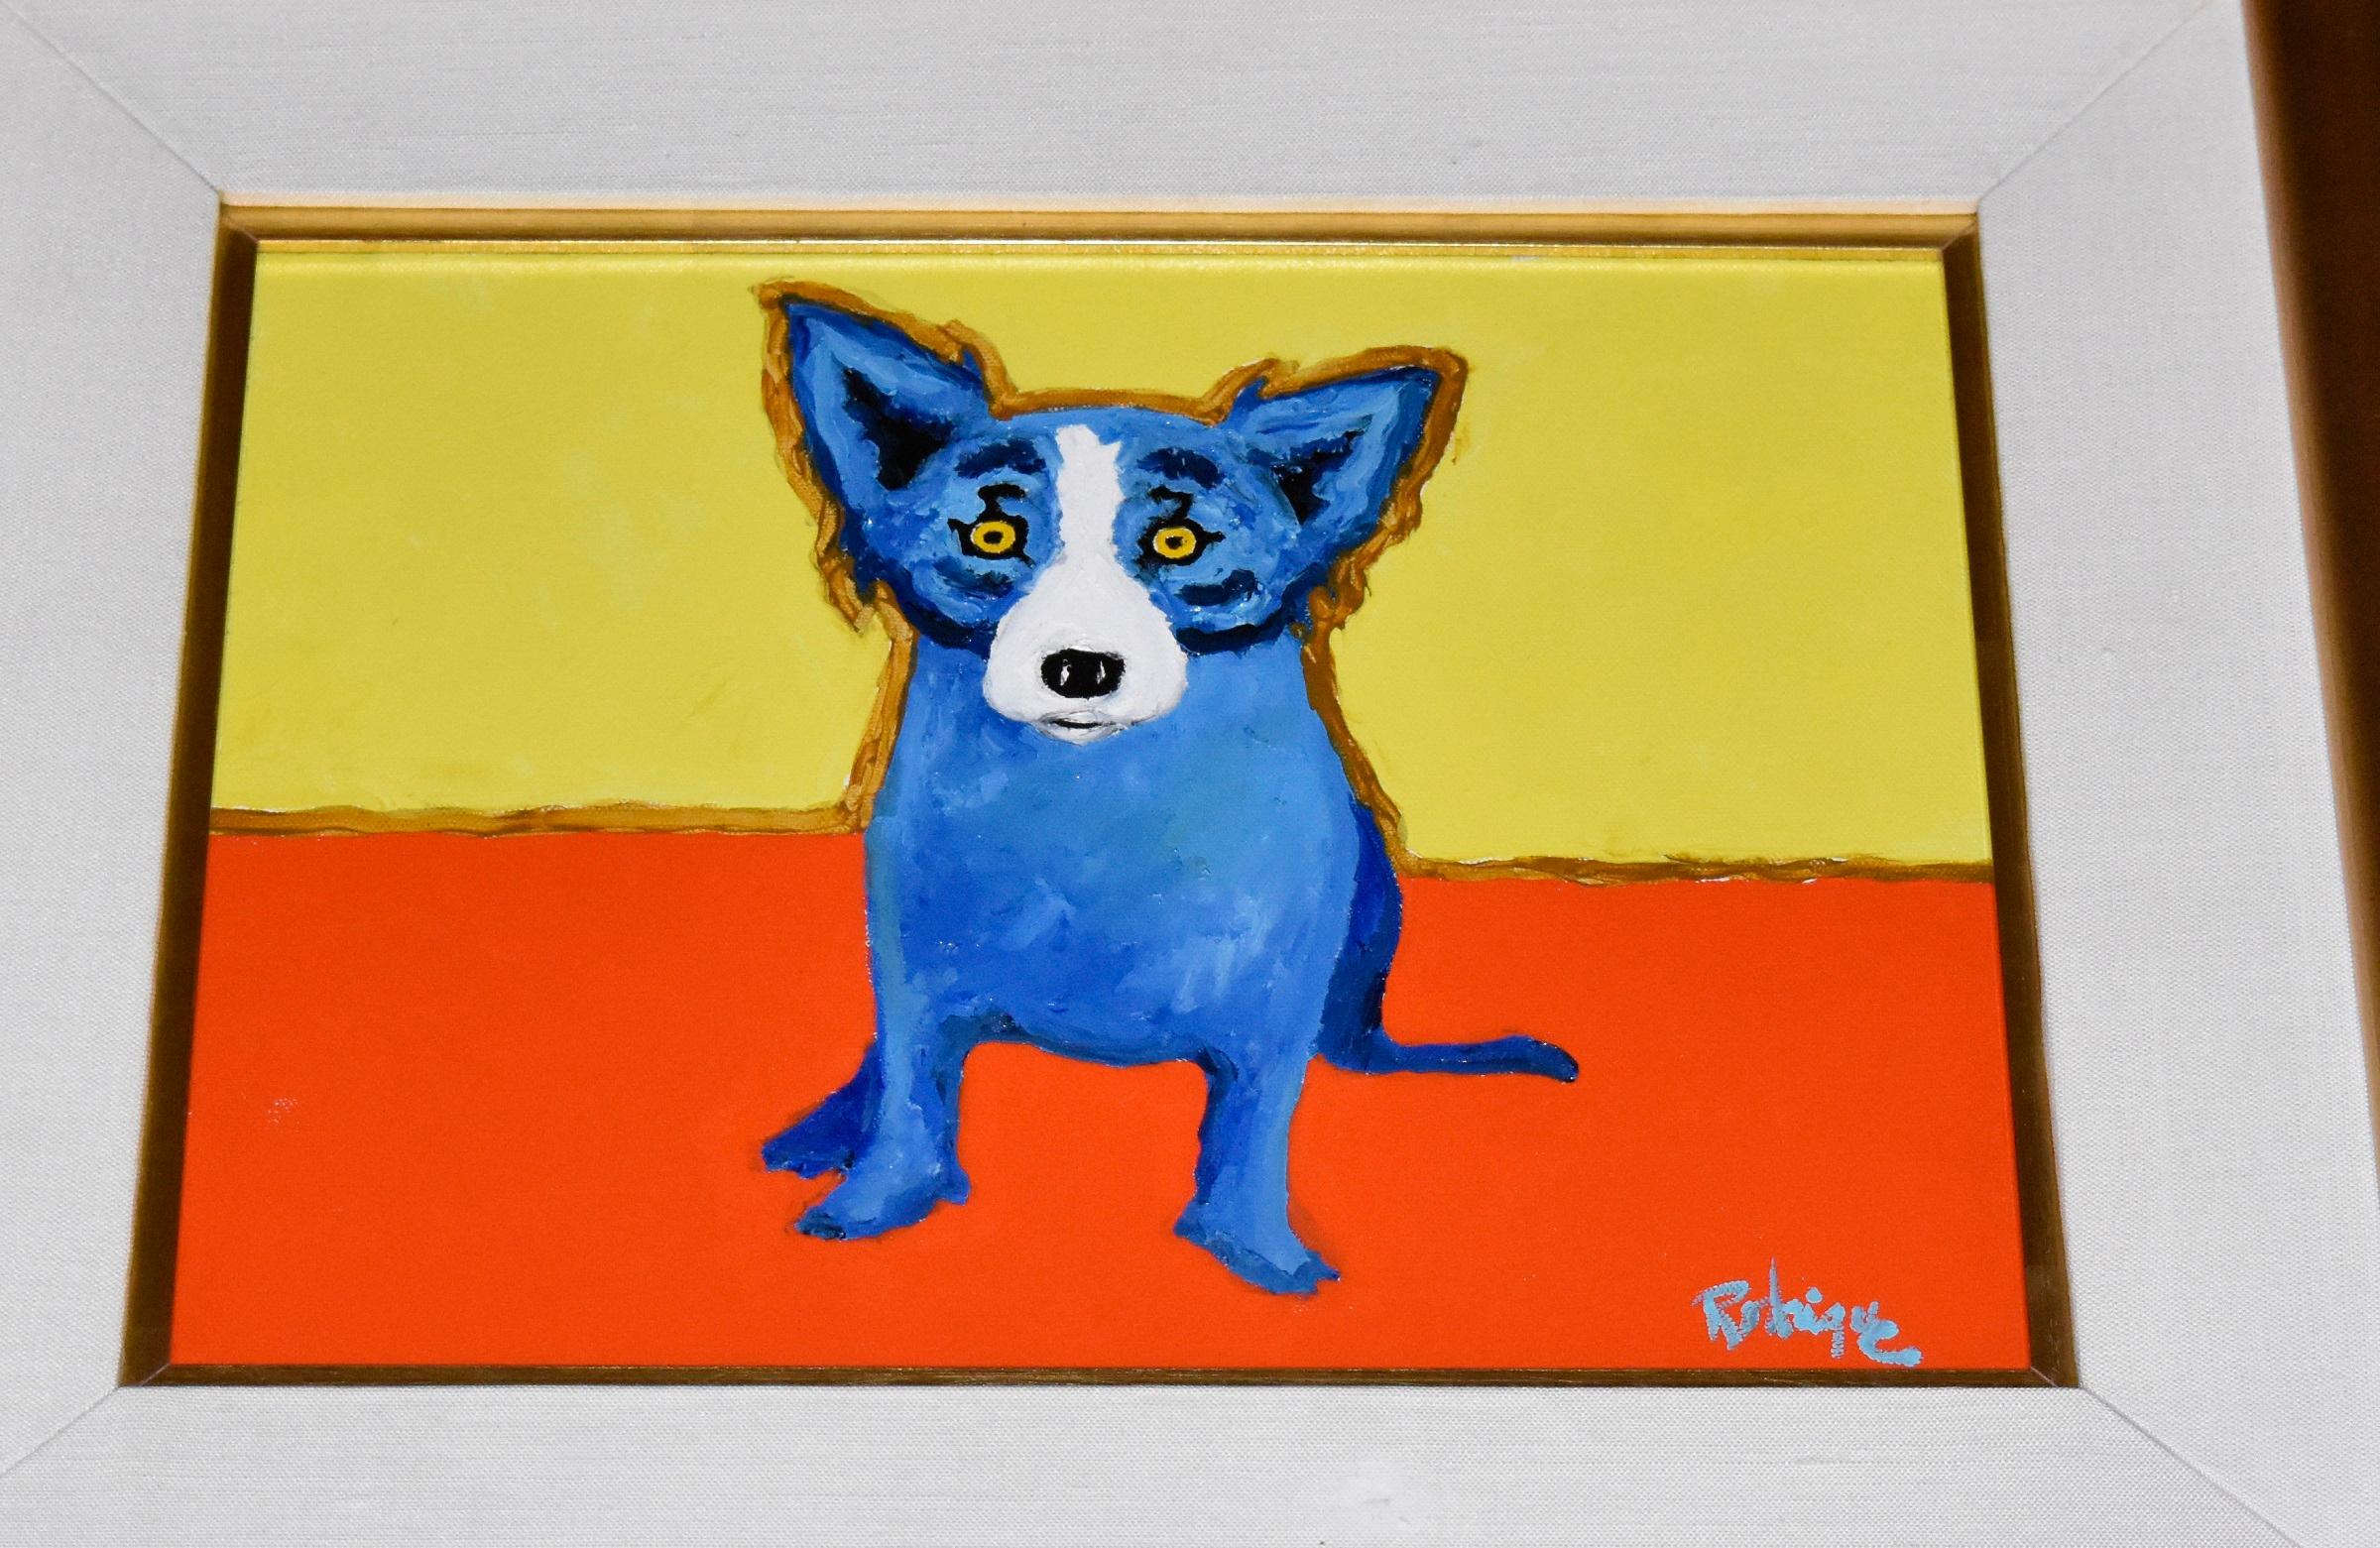 Original - Center Stage - Acrylic on Linen - Signed Blue Dog - Painting by George Rodrigue